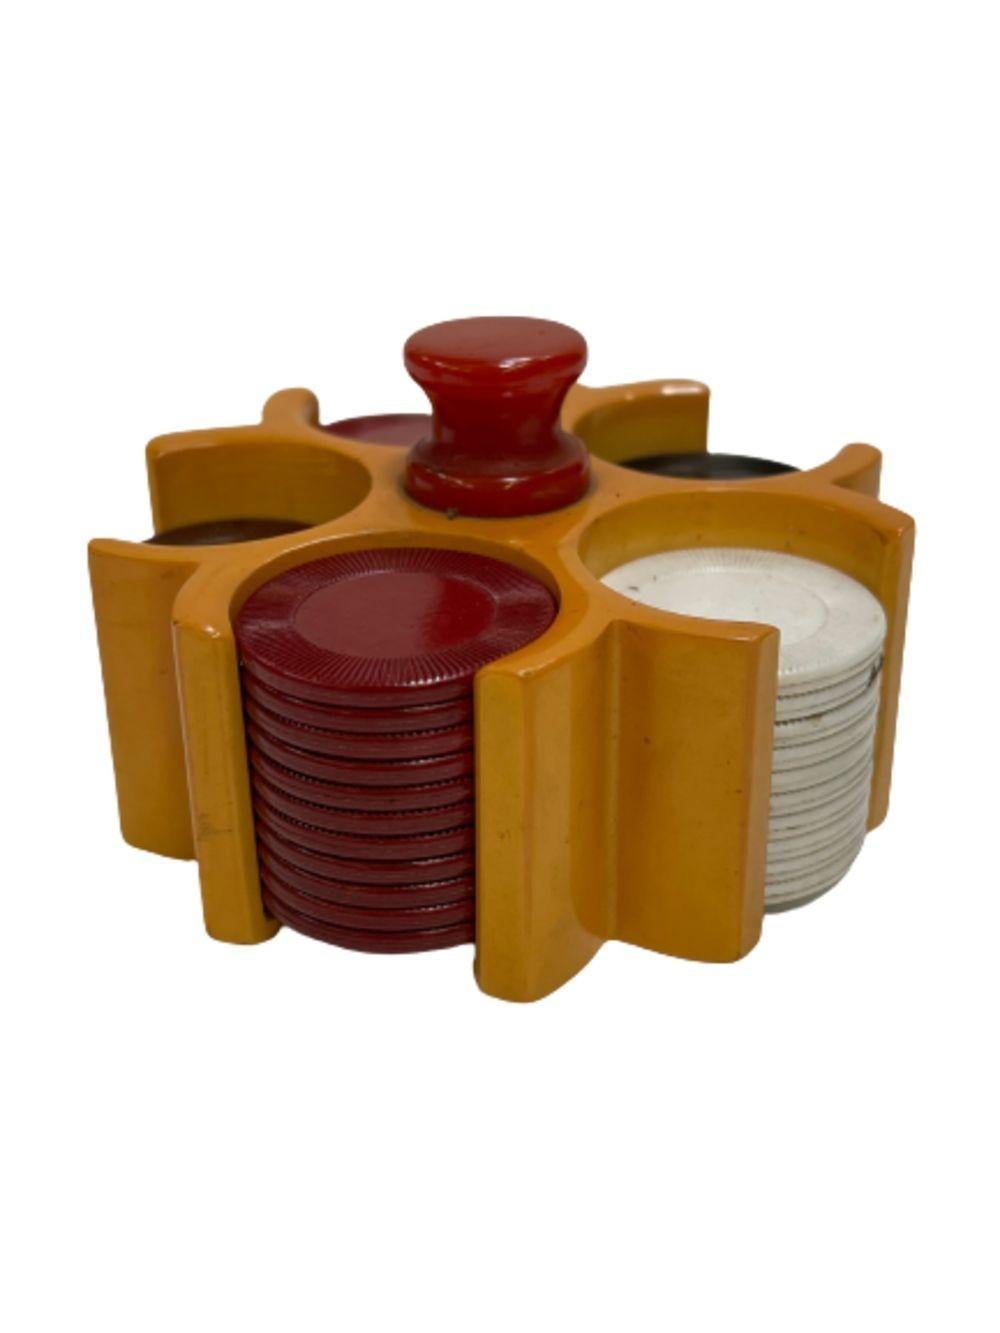 Original 1930s set of 54 Bakelite Poker Chips featuring red, brown, black, and white with matching Butterscotch caddy holder and striker table top lighter. The set is all original is matching with an unused striker tip.
Overall this set is in very